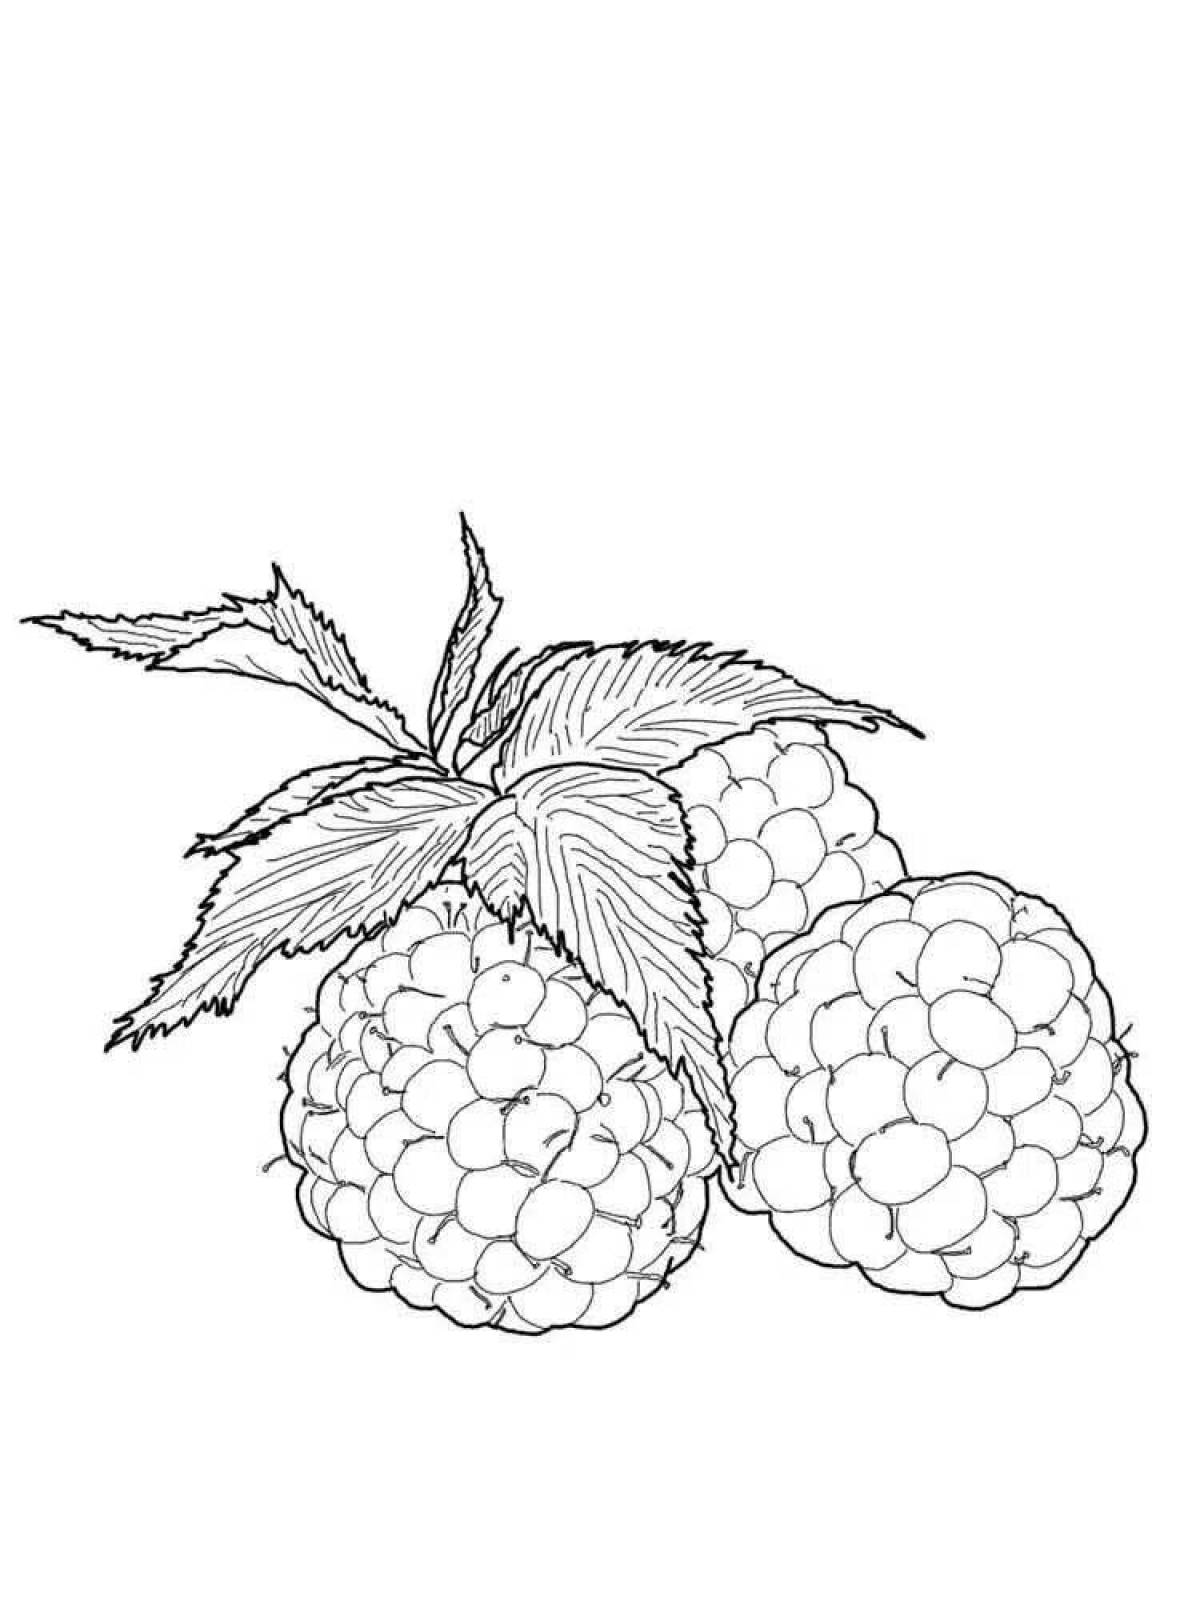 Sunny raspberry coloring page